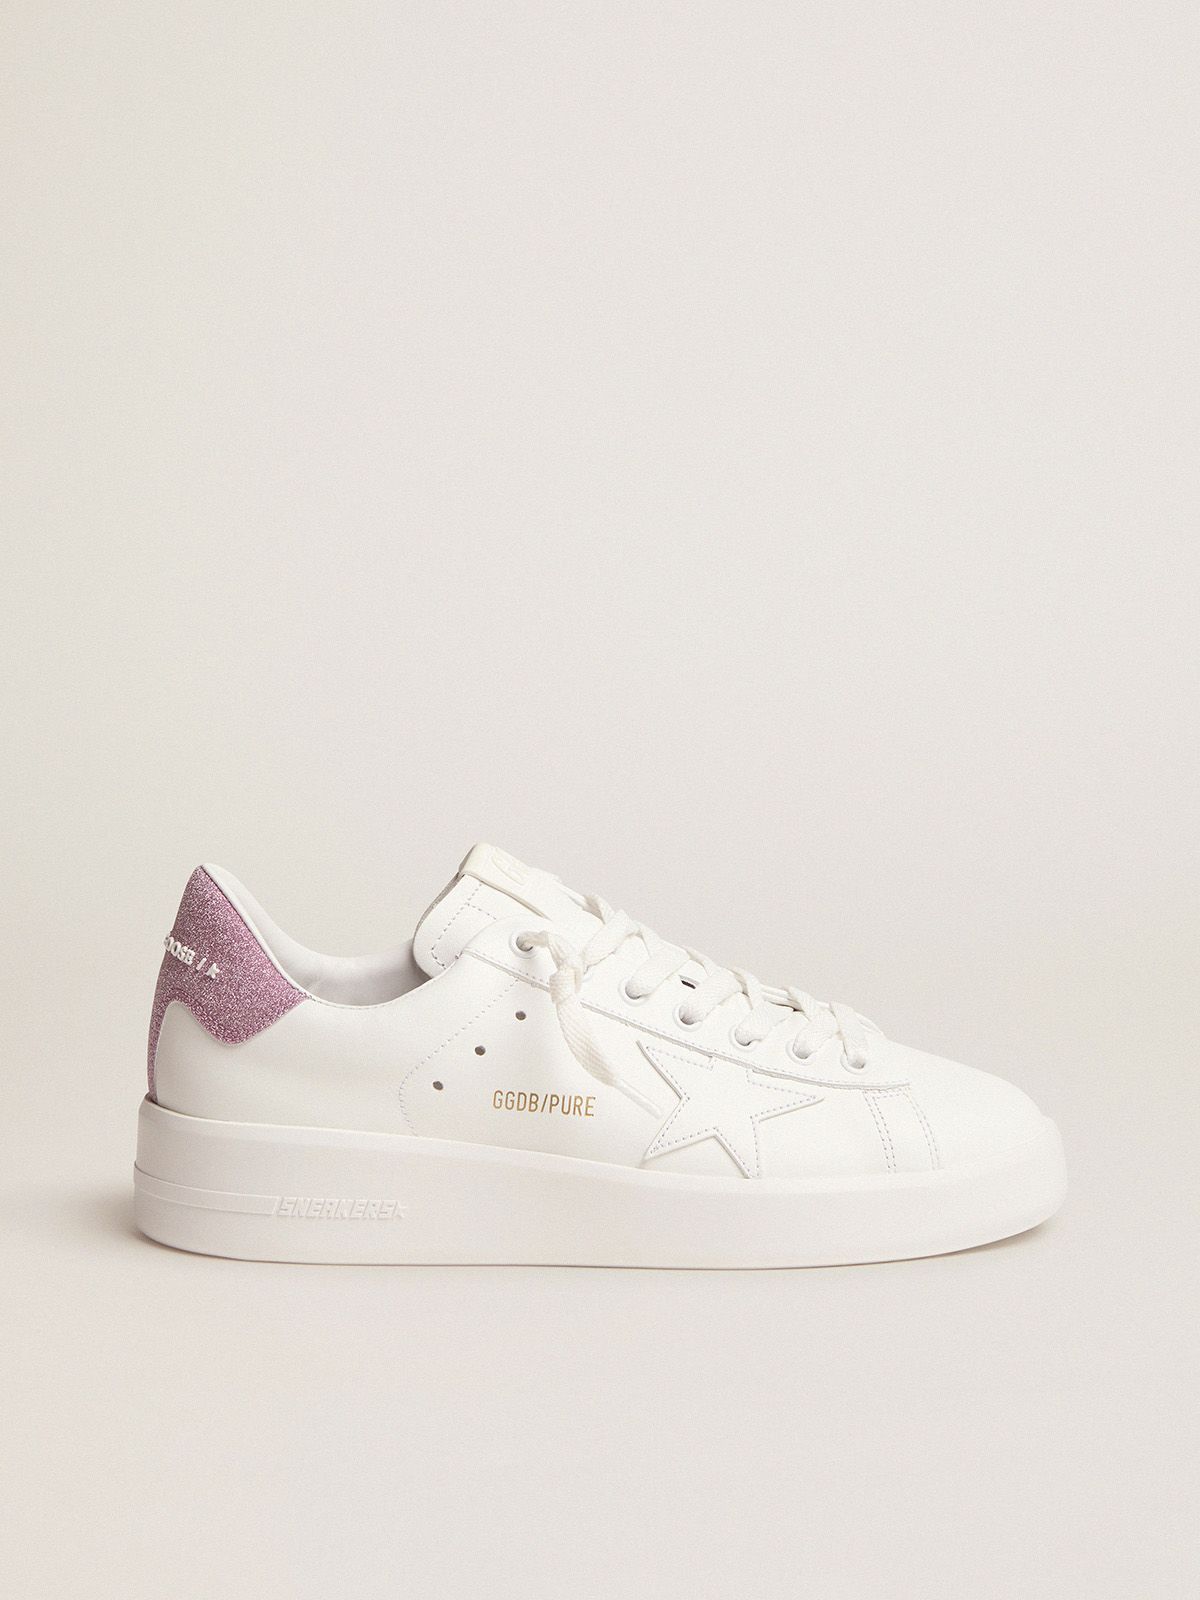 Purestar sneakers in white leather with pink glitter heel tab | Golden ...